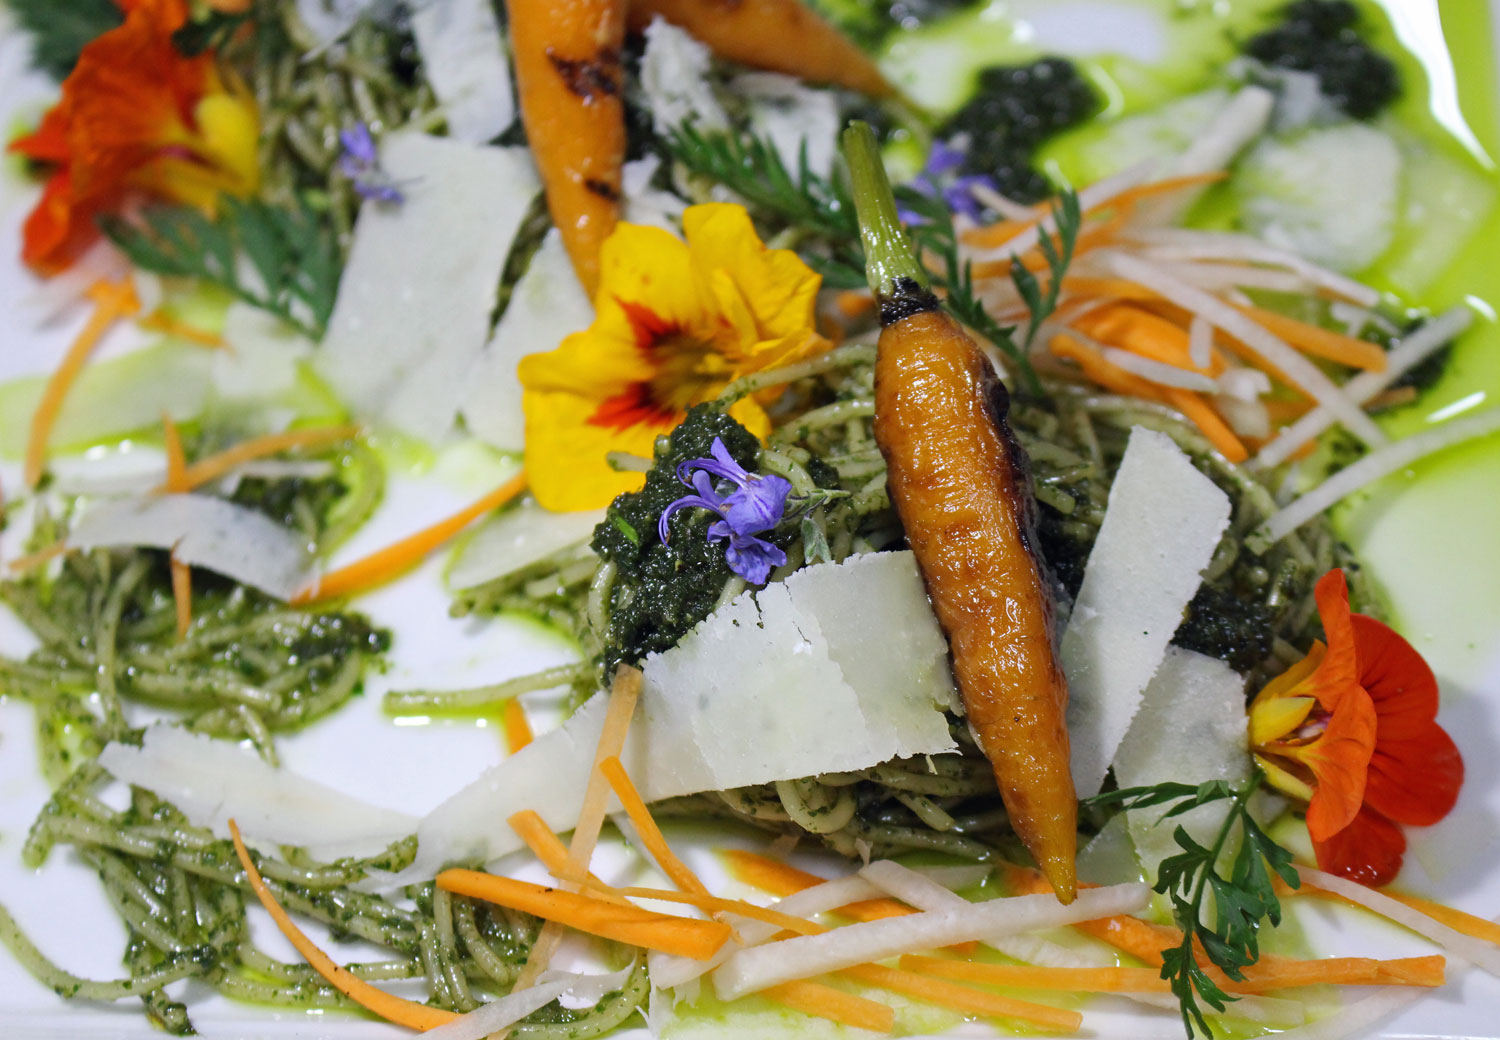 Our Pasta with Carrot Top Pesto and Grilled Baby Carrots recipe is vegetarian and utilises the entire carrot from the top to the tip.